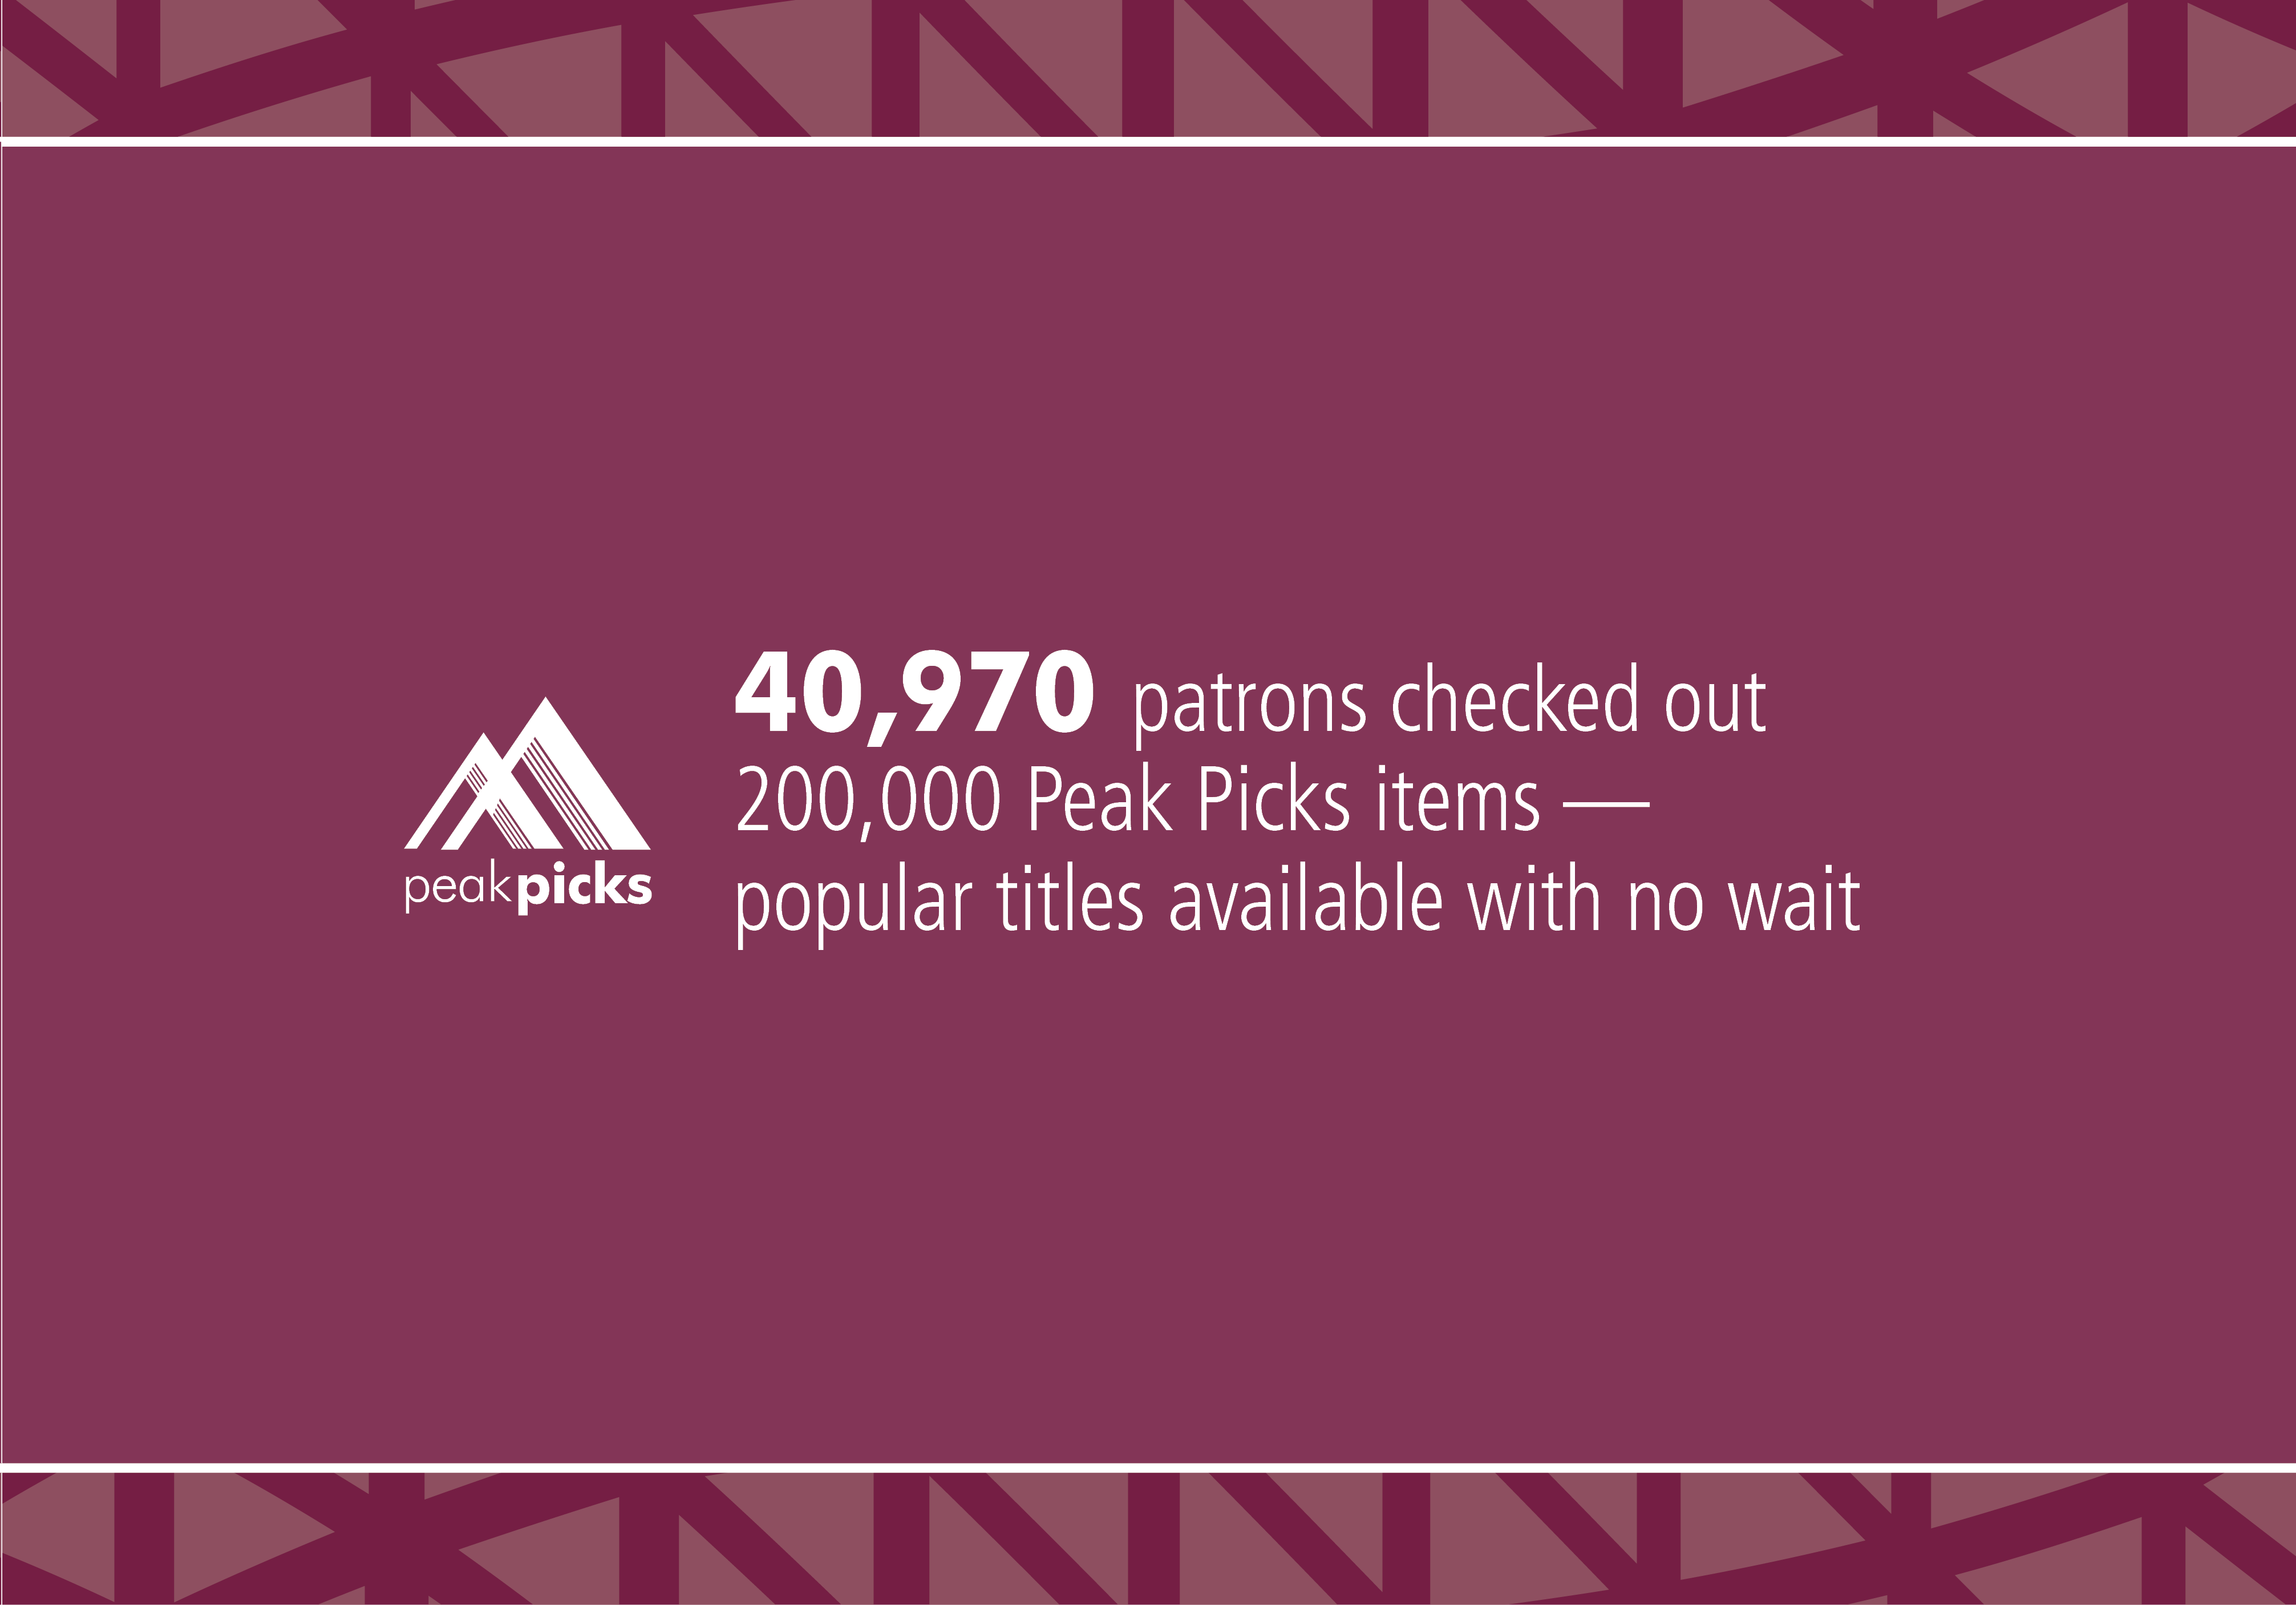 40,970 patrons checked out 200,000 Peak Picks items - popular titles available with no wait